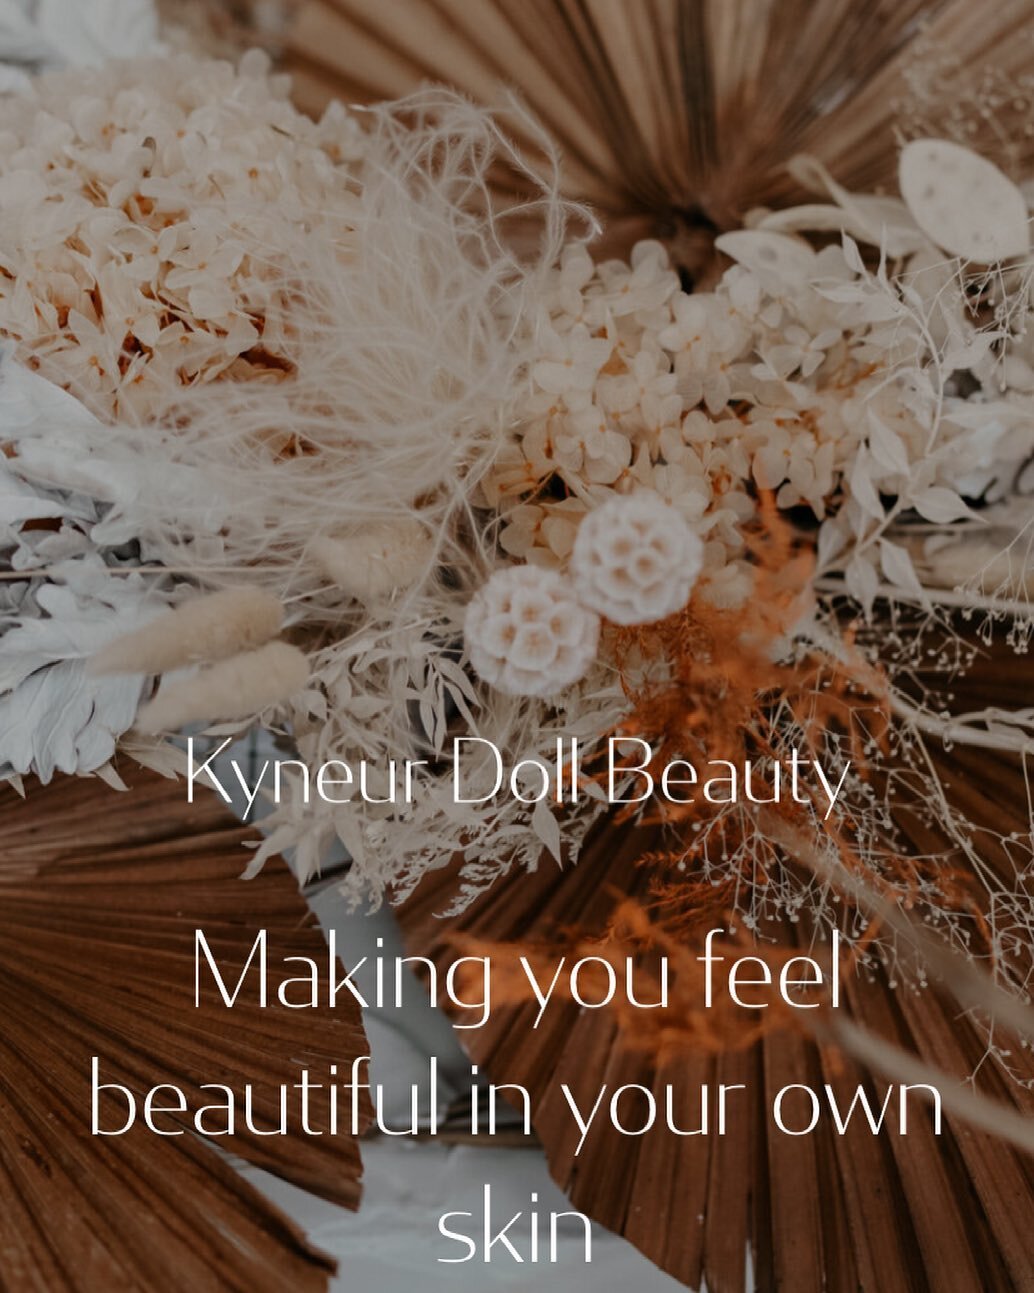 Have you checked out our new website for Kyneur Doll Skin and Beauty? 

The link is in my bio 

Let us know what you think 🤍💫

Thank you!!! @_designbymeg you&rsquo;re the best